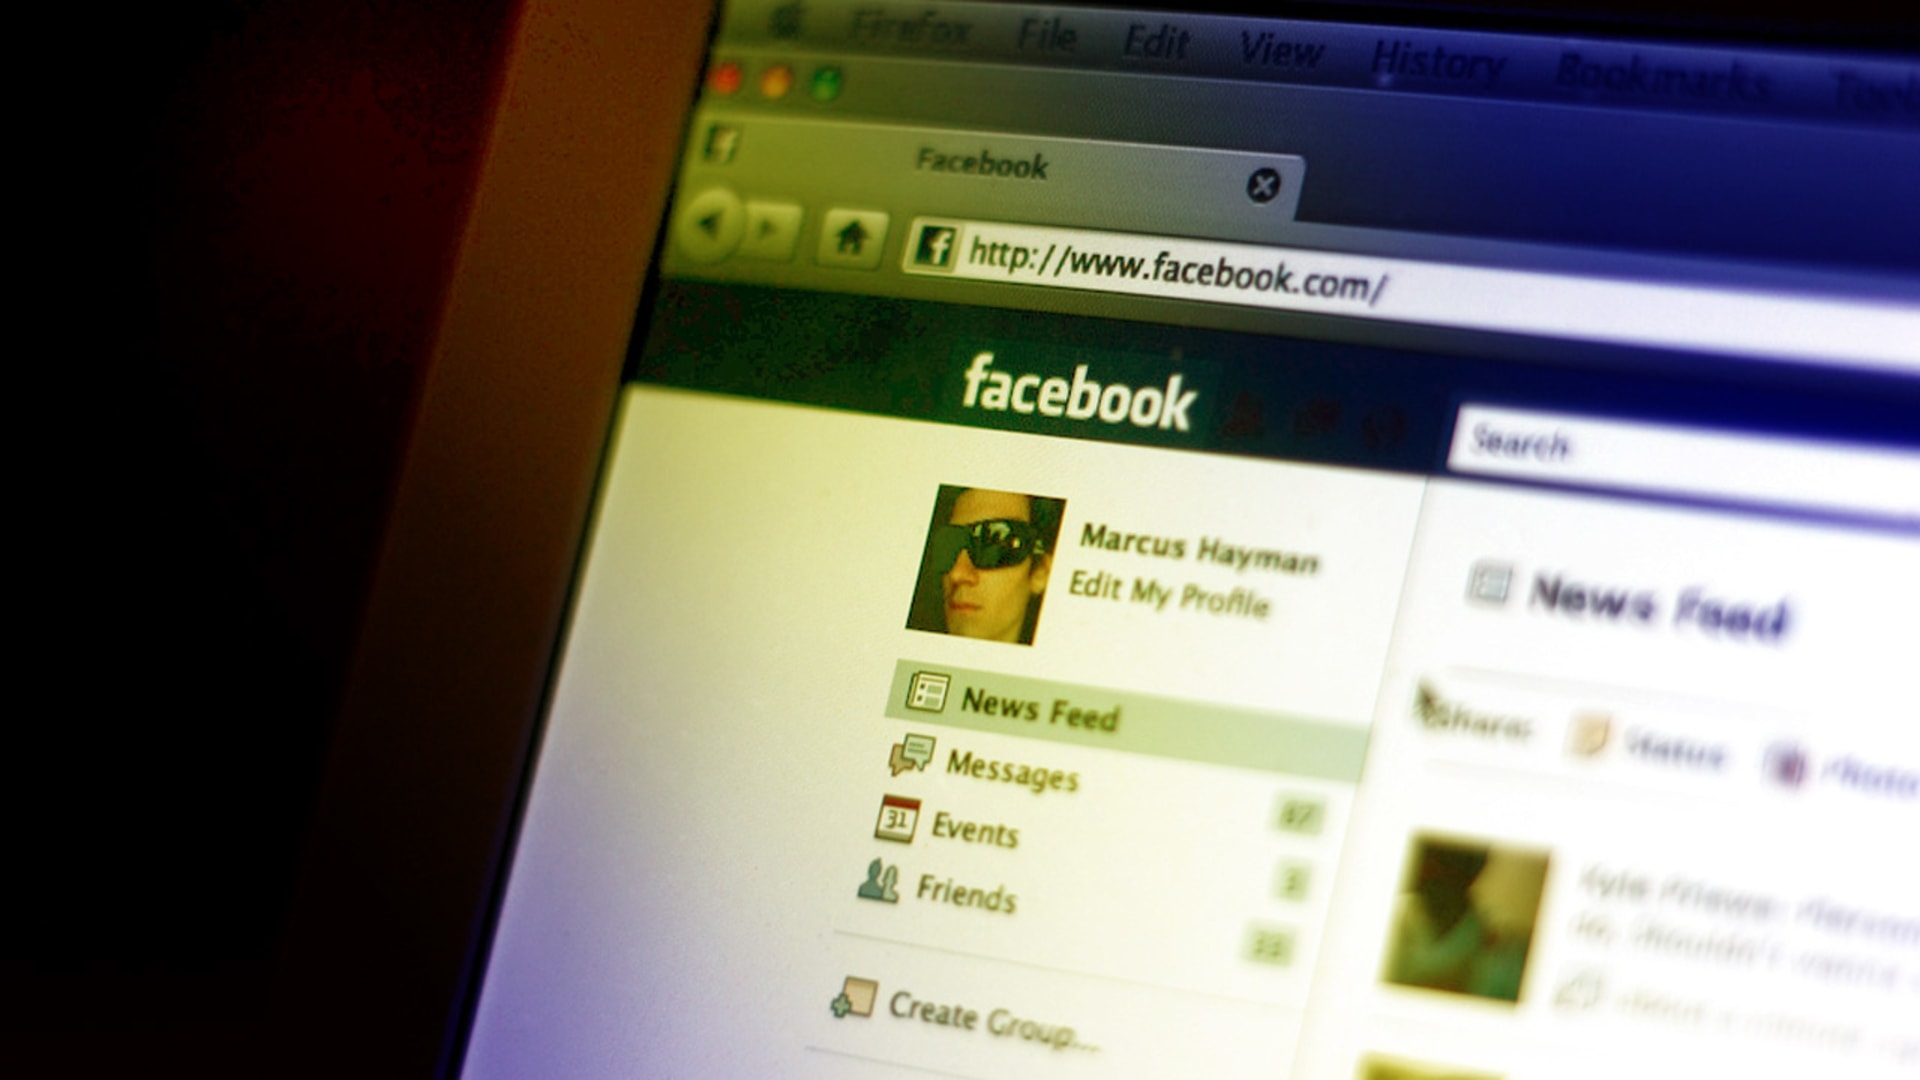 Can we trust Facebook’s users to decide what news we should trust?